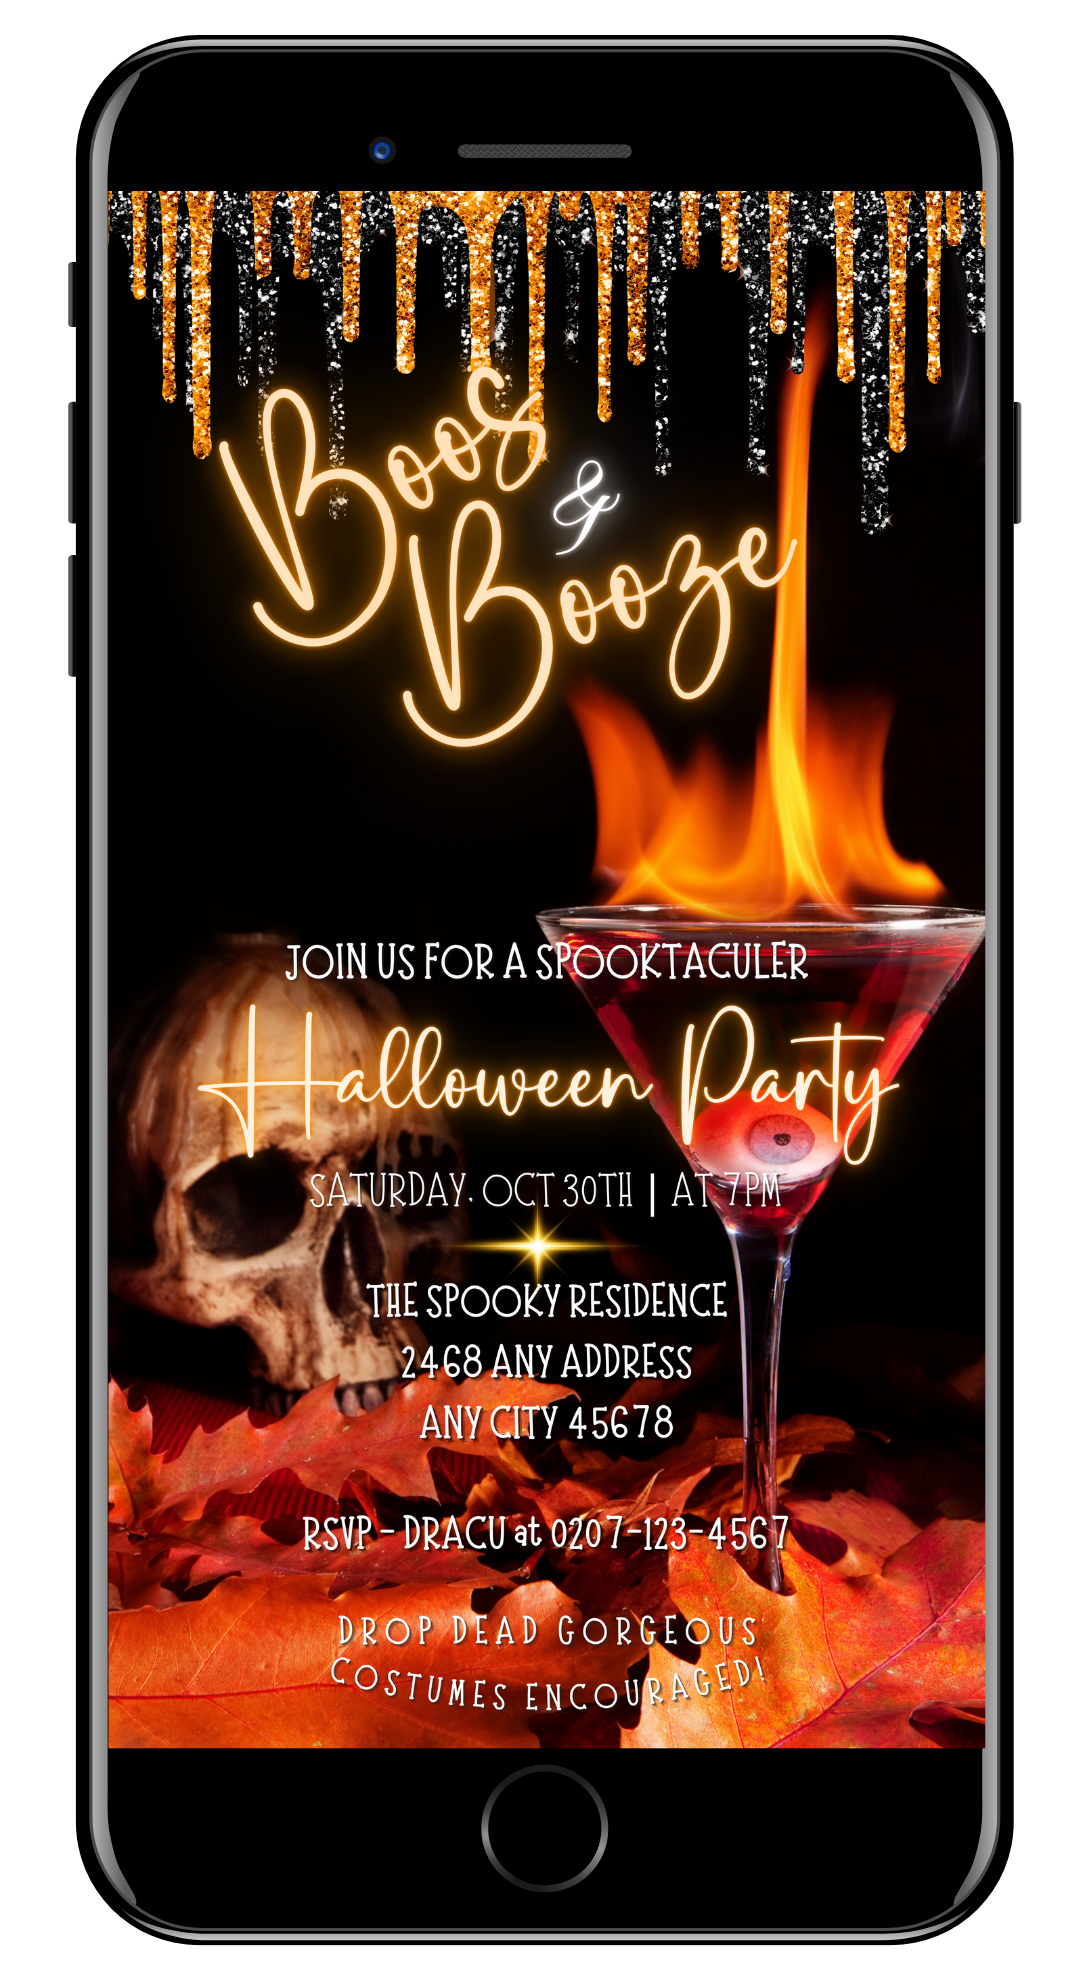 Digital invitation template featuring a flaming skull and eyeball cocktail glass, perfect for Halloween parties. Easily editable using Canva for personalized event invites.